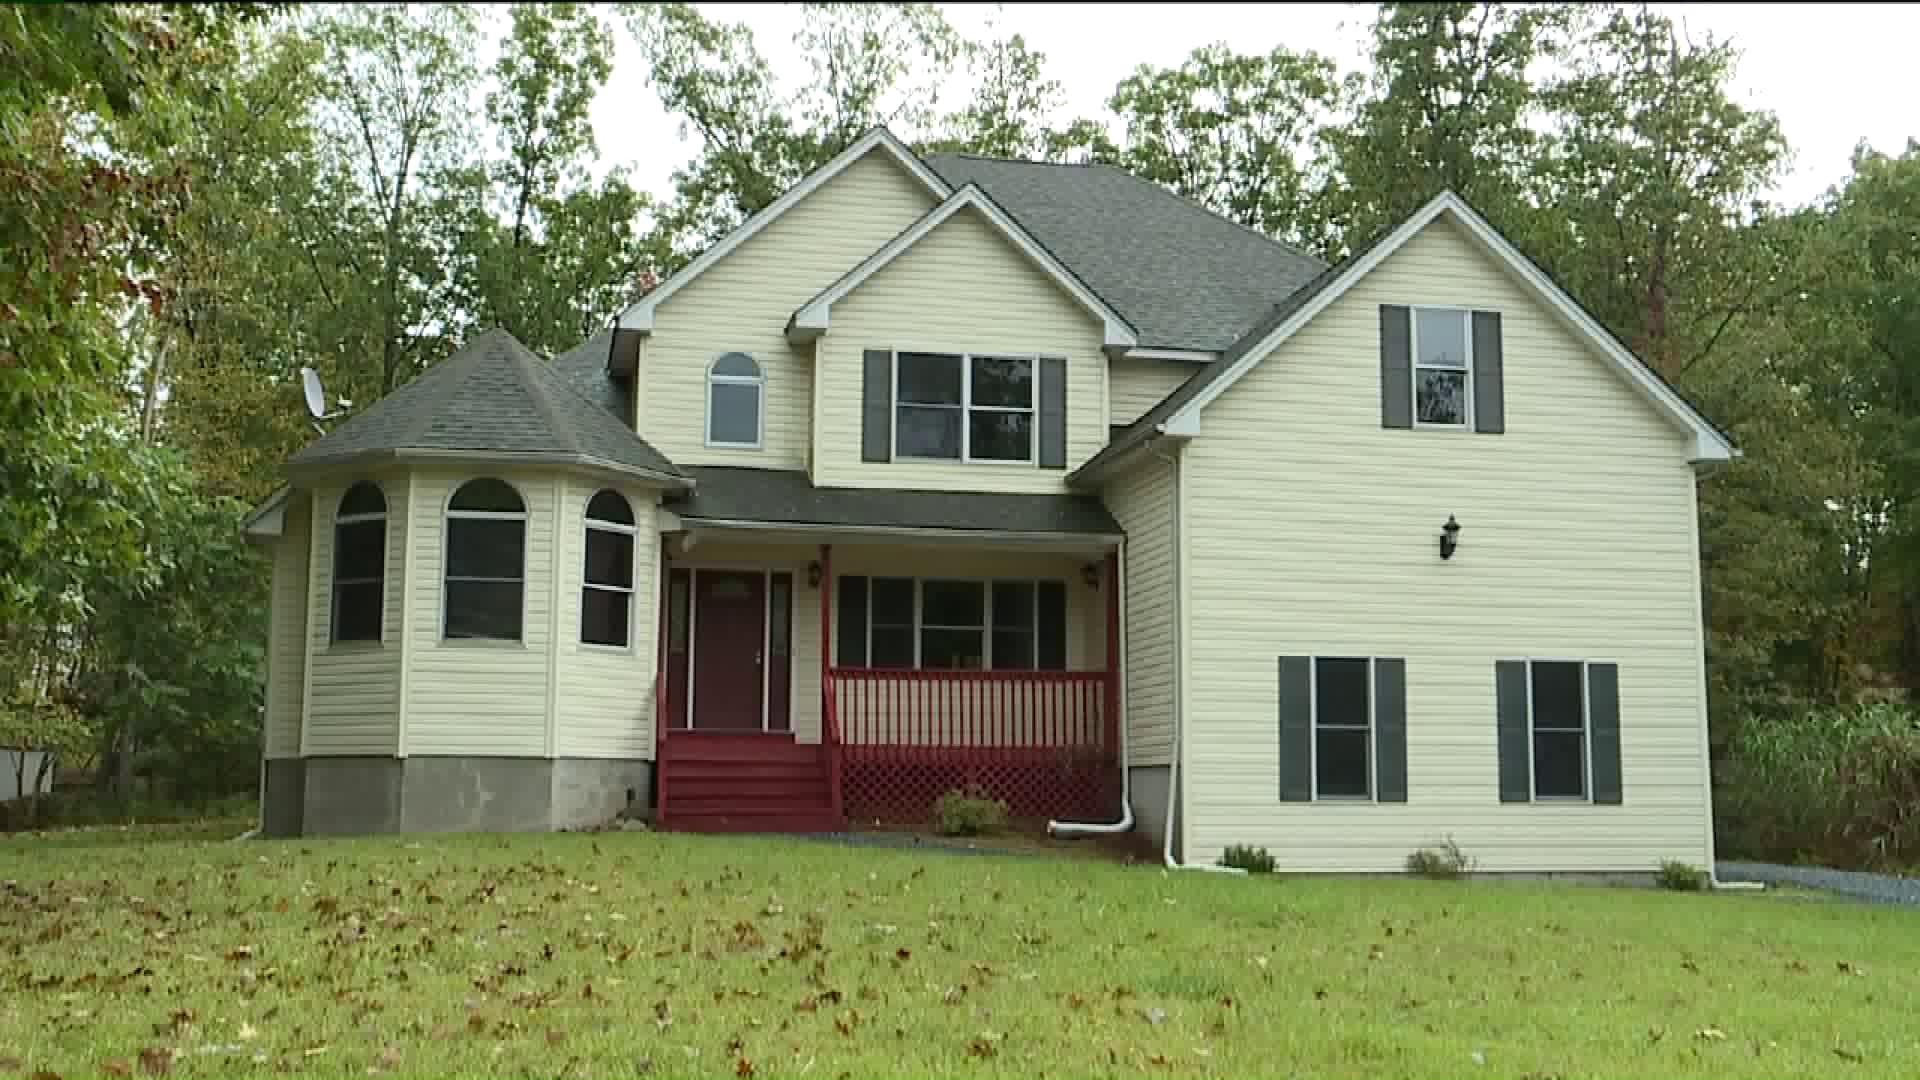 Veteran Group to Sell Donated Home